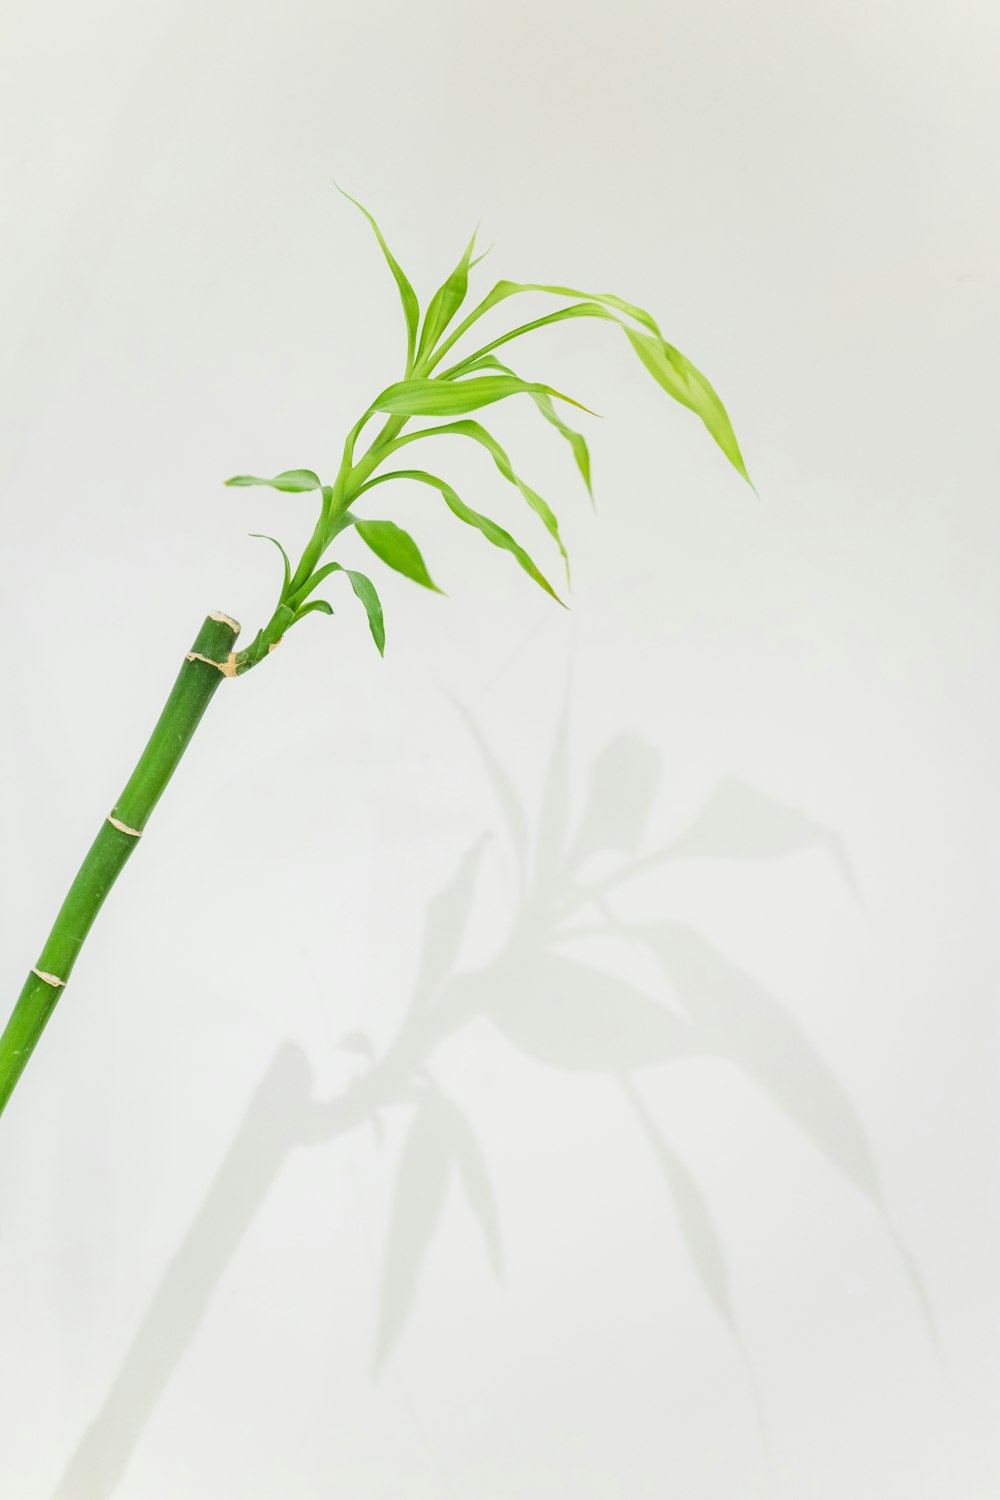 a bamboo plant with long green leaves on a white background